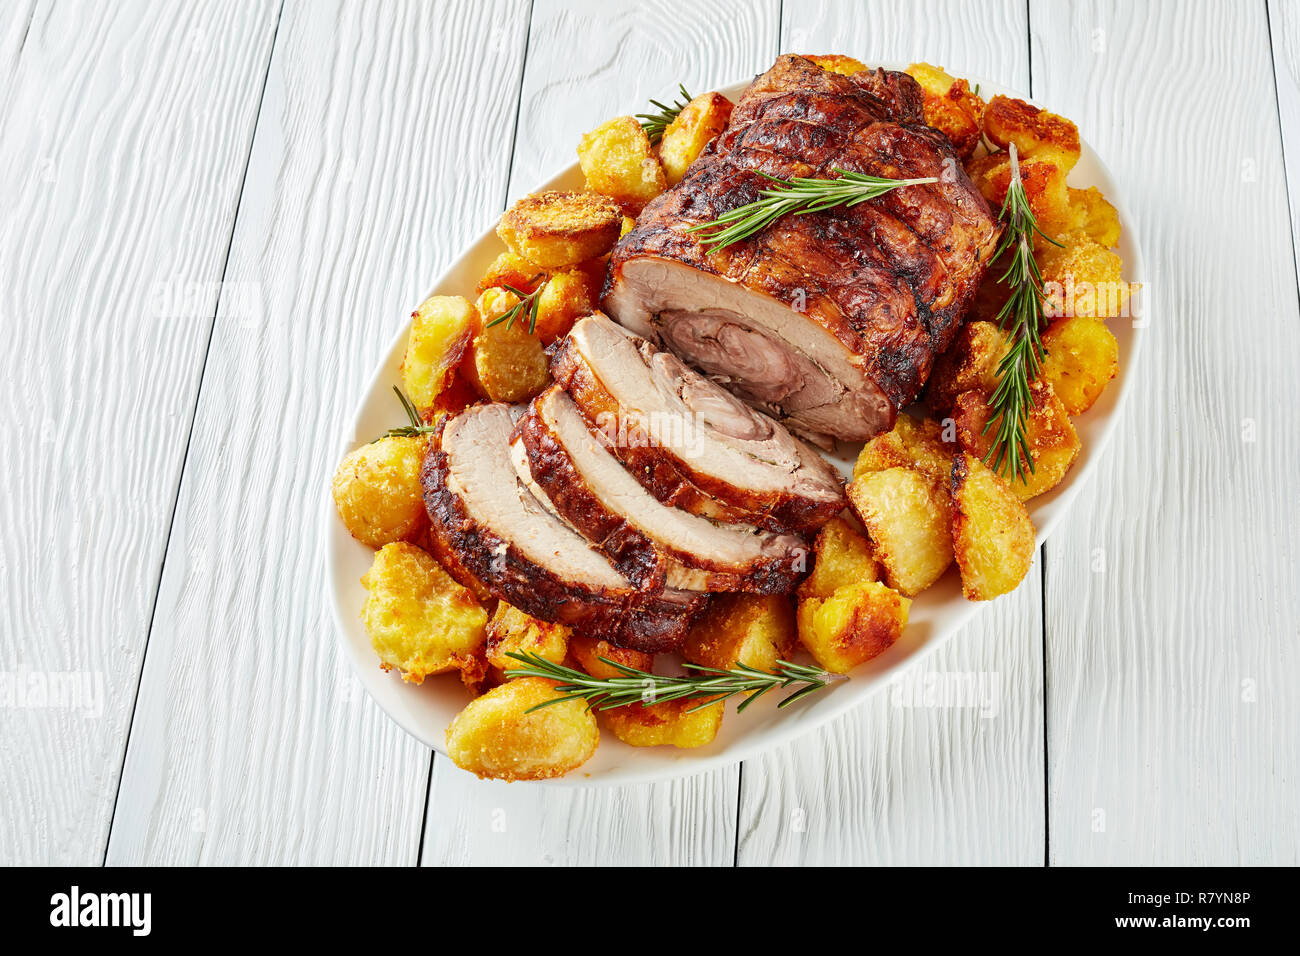 sliced roast pork roulade -  Porchetta, delicious pork roast with crusty roast potatoes served on an oval dish on white wooden table, close-up Stock Photo